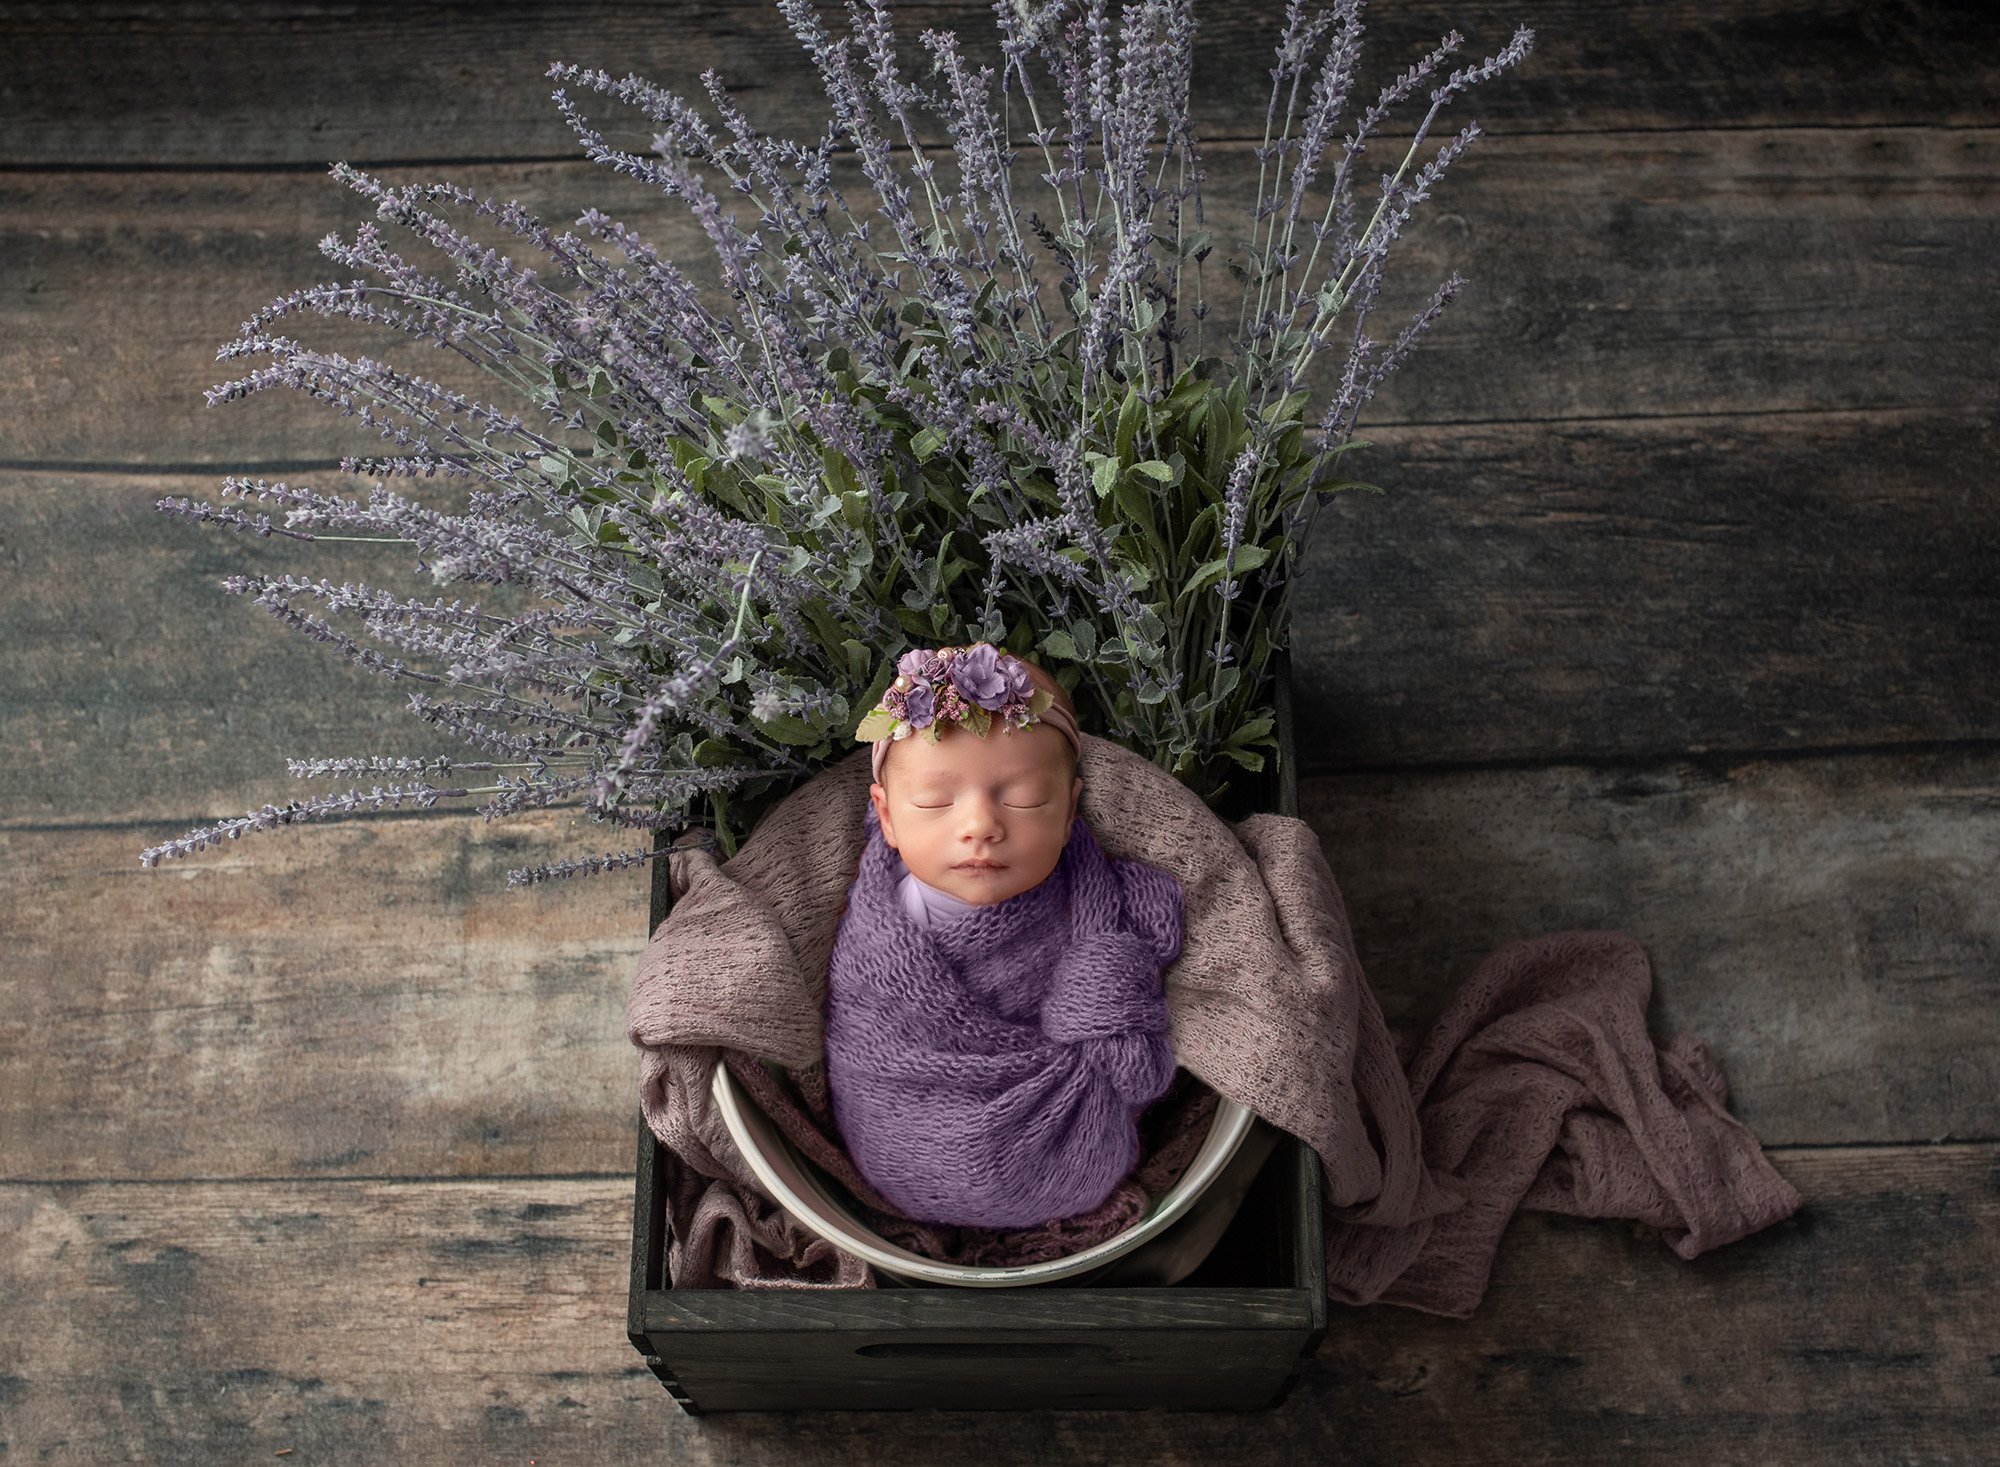 newborn baby girl swaddled in purple asleep in bucket with lots of lavender on wooden background